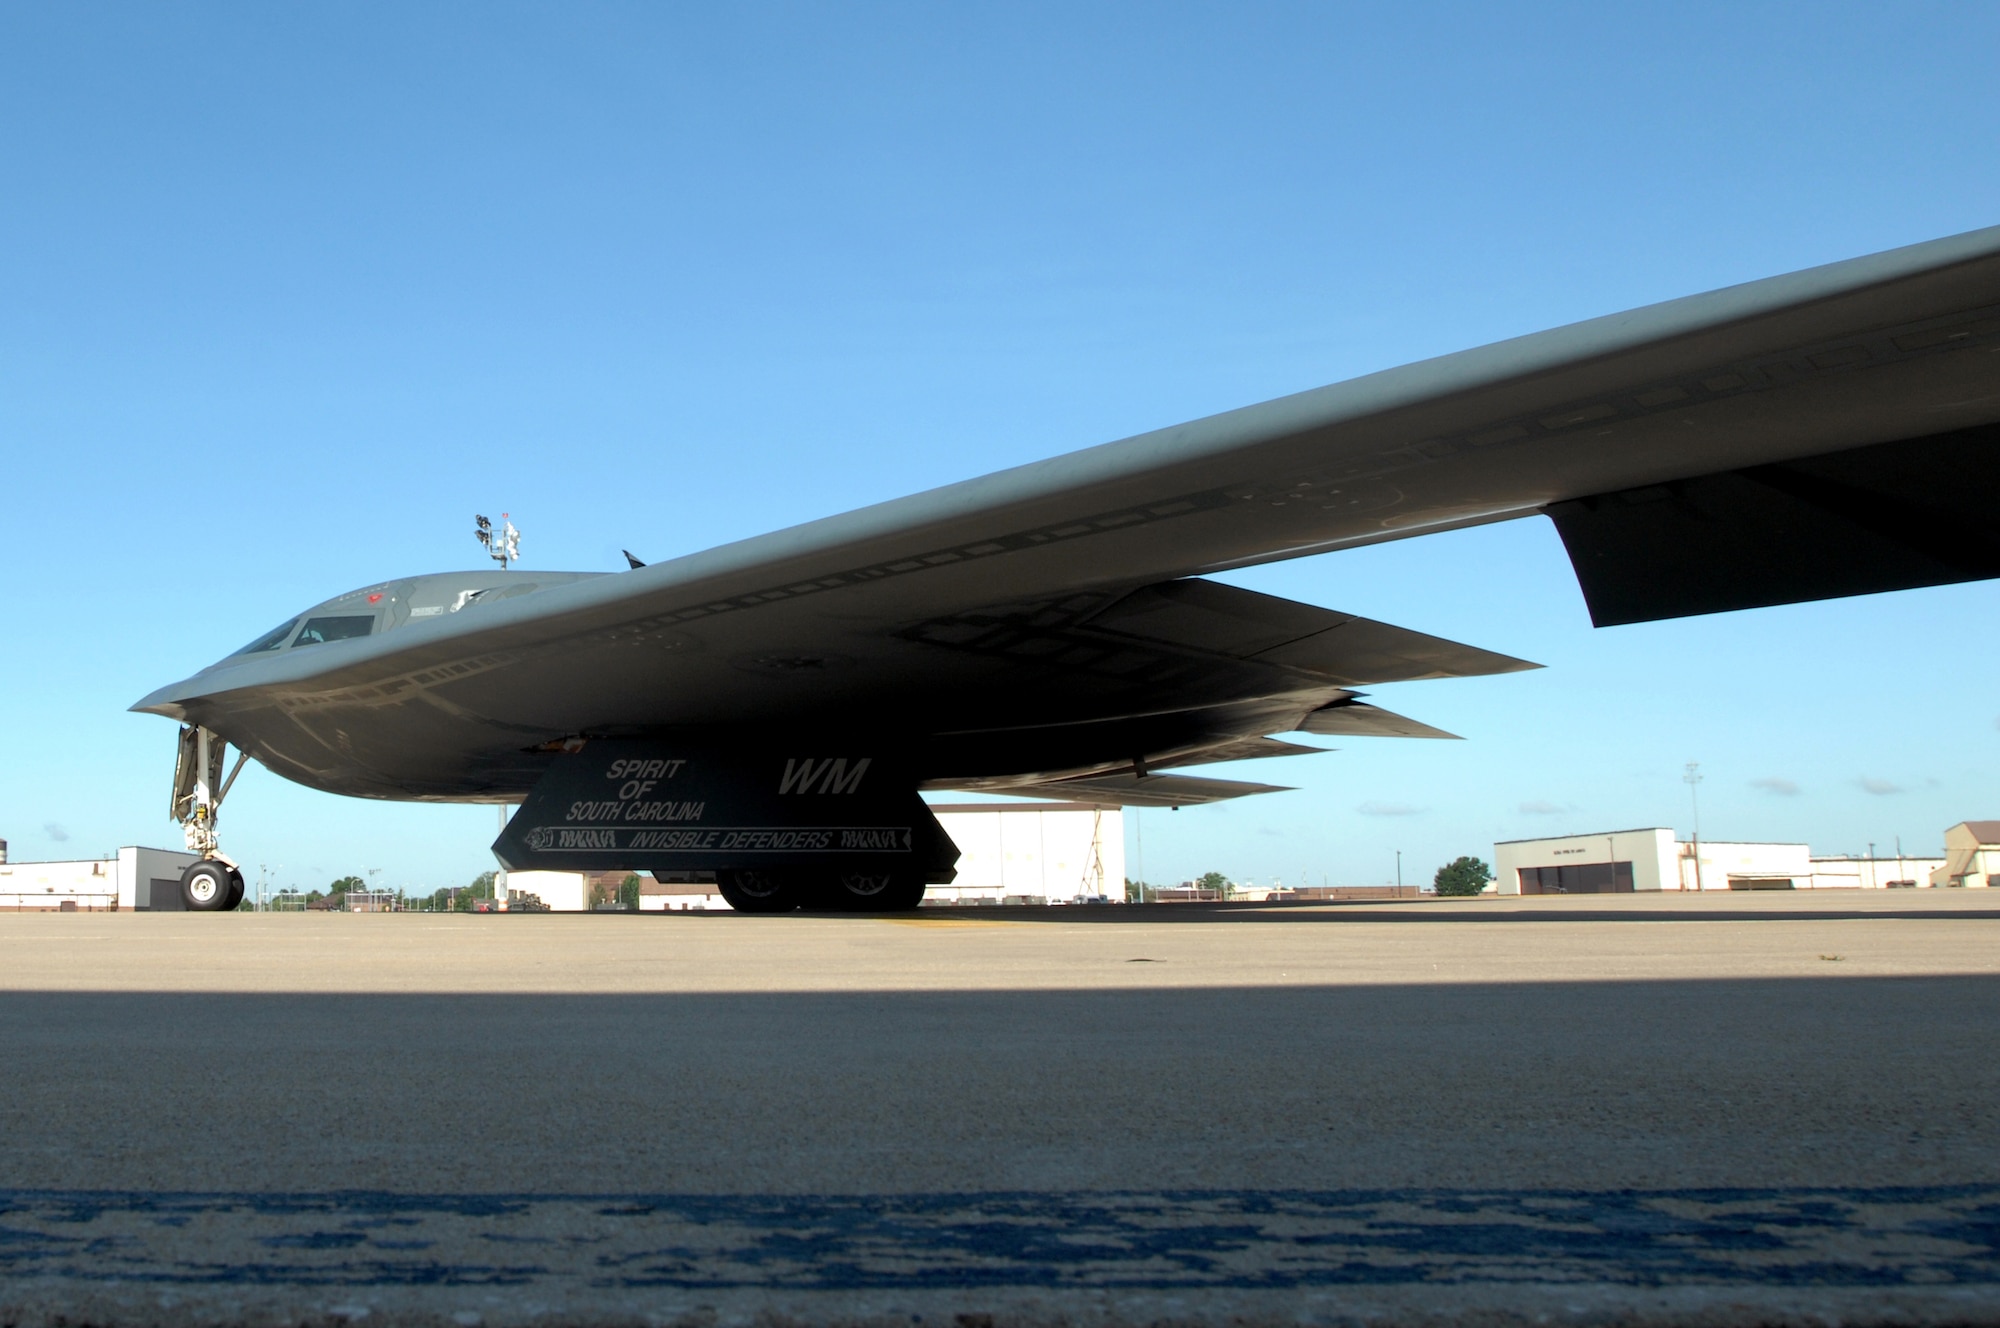 WHITEMAN AIR FORCE BASE, Mo. – A B-2 Spirit, taxis down the Whiteman flightline prior to takeoff, Aug. 22, 2009. Twenty B-2 bombers are assigned to the 509th Bomb Wing. The B-2 brings massive firepower to bear, in a short time, anywhere on the globe through previously impenetrable defenses. (U.S. Air Force photo/Senior Airman Kenny Holston)